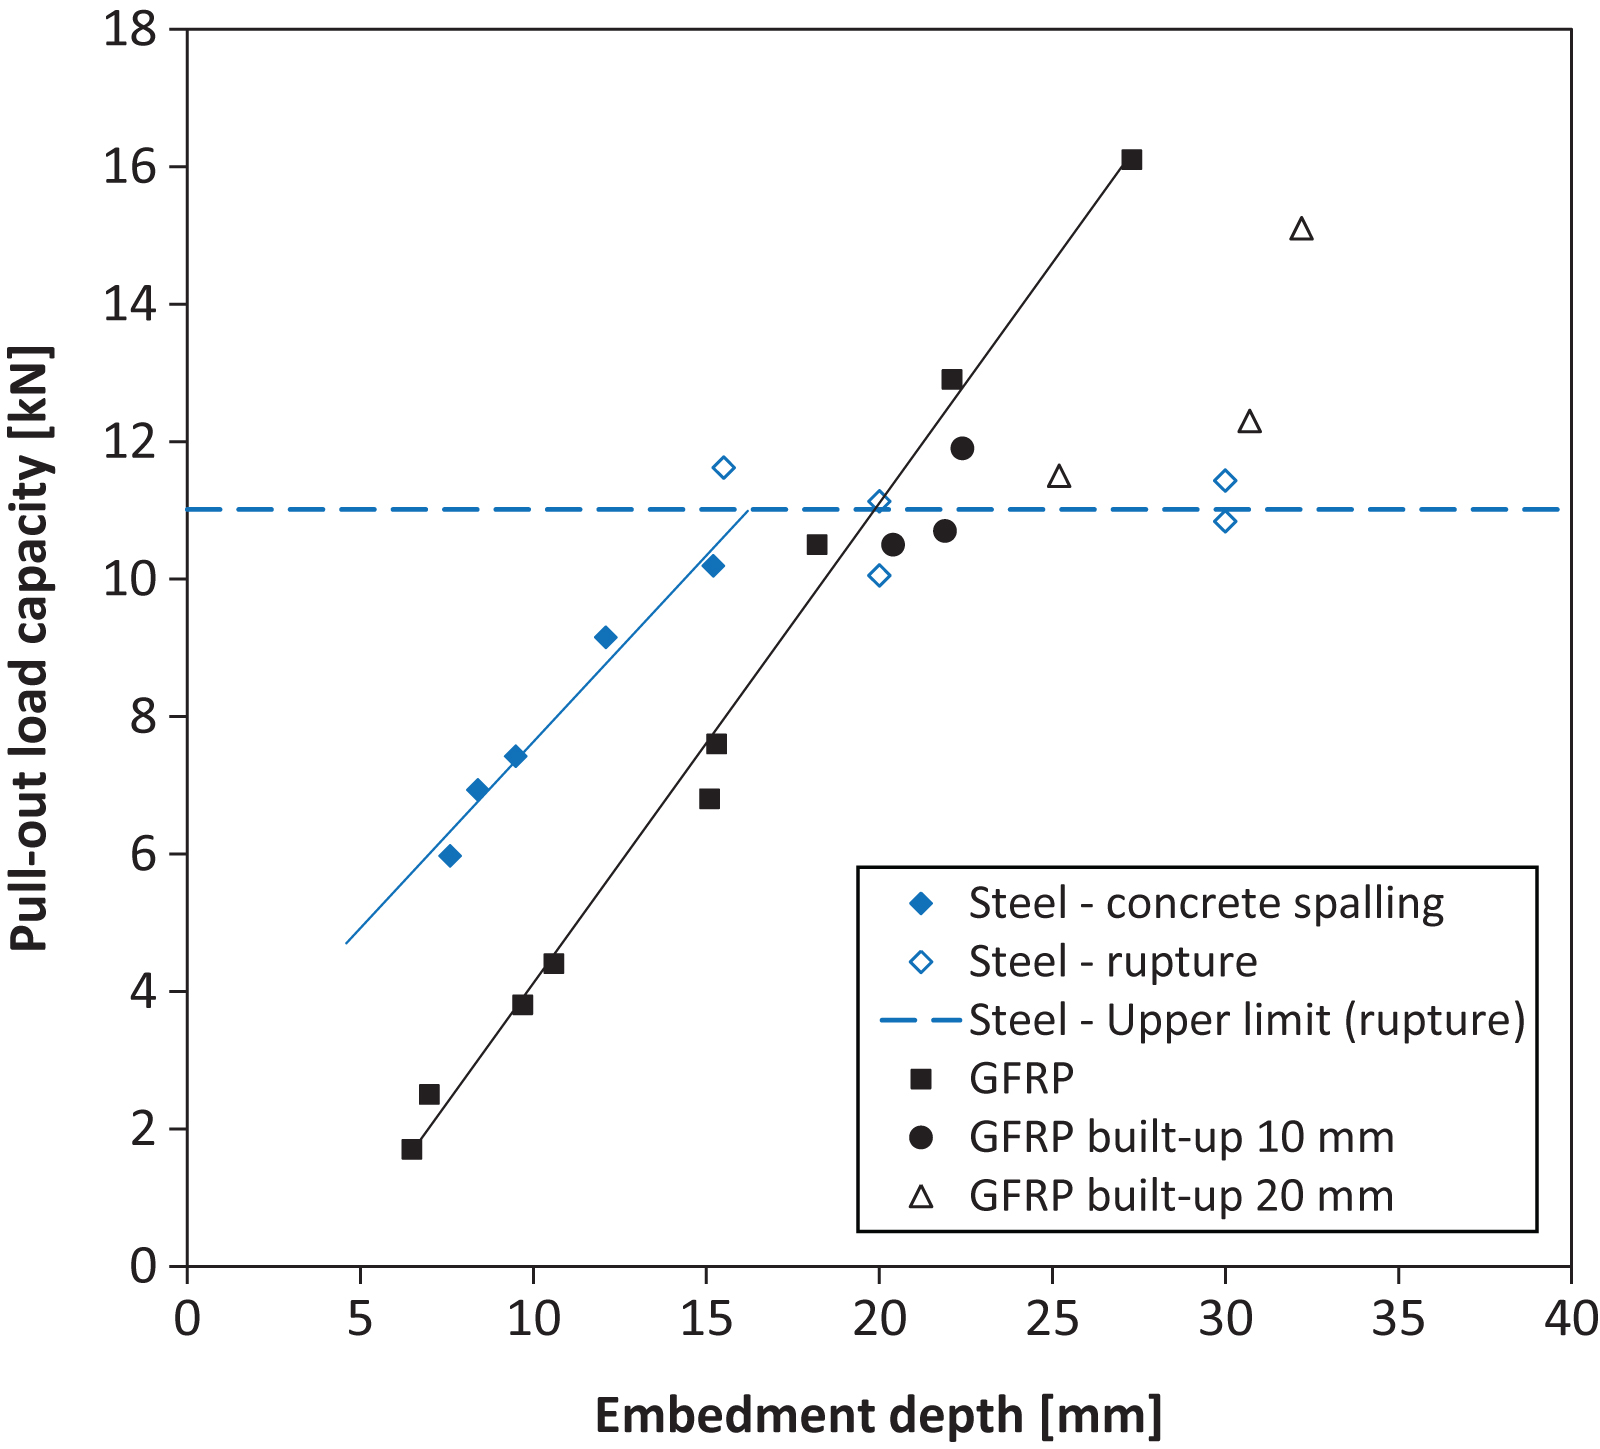 Pull-out capacity as function of embedment depth for steel connector, GFRP connector, and the build-up configurations with GFRP connector.